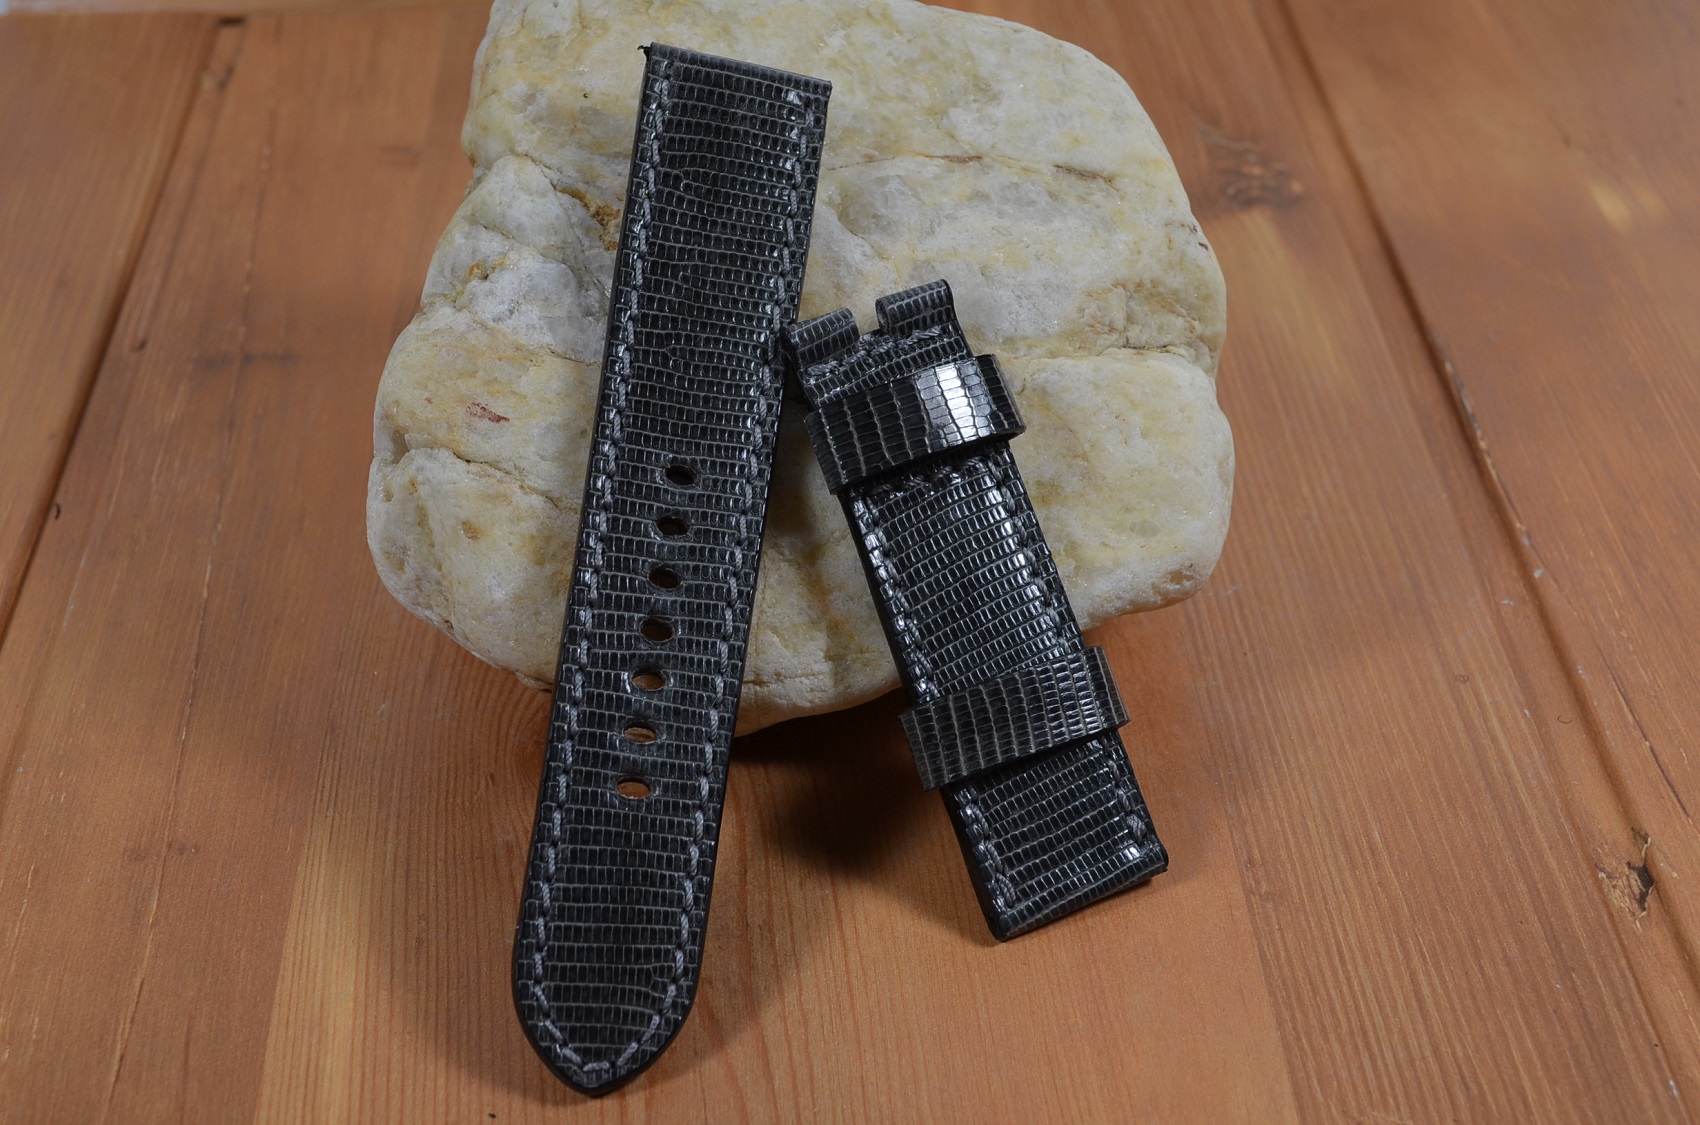 GREY SHINY is one of our hand crafted watch straps. Available in grey color, 3.5 - 4 mm thick.